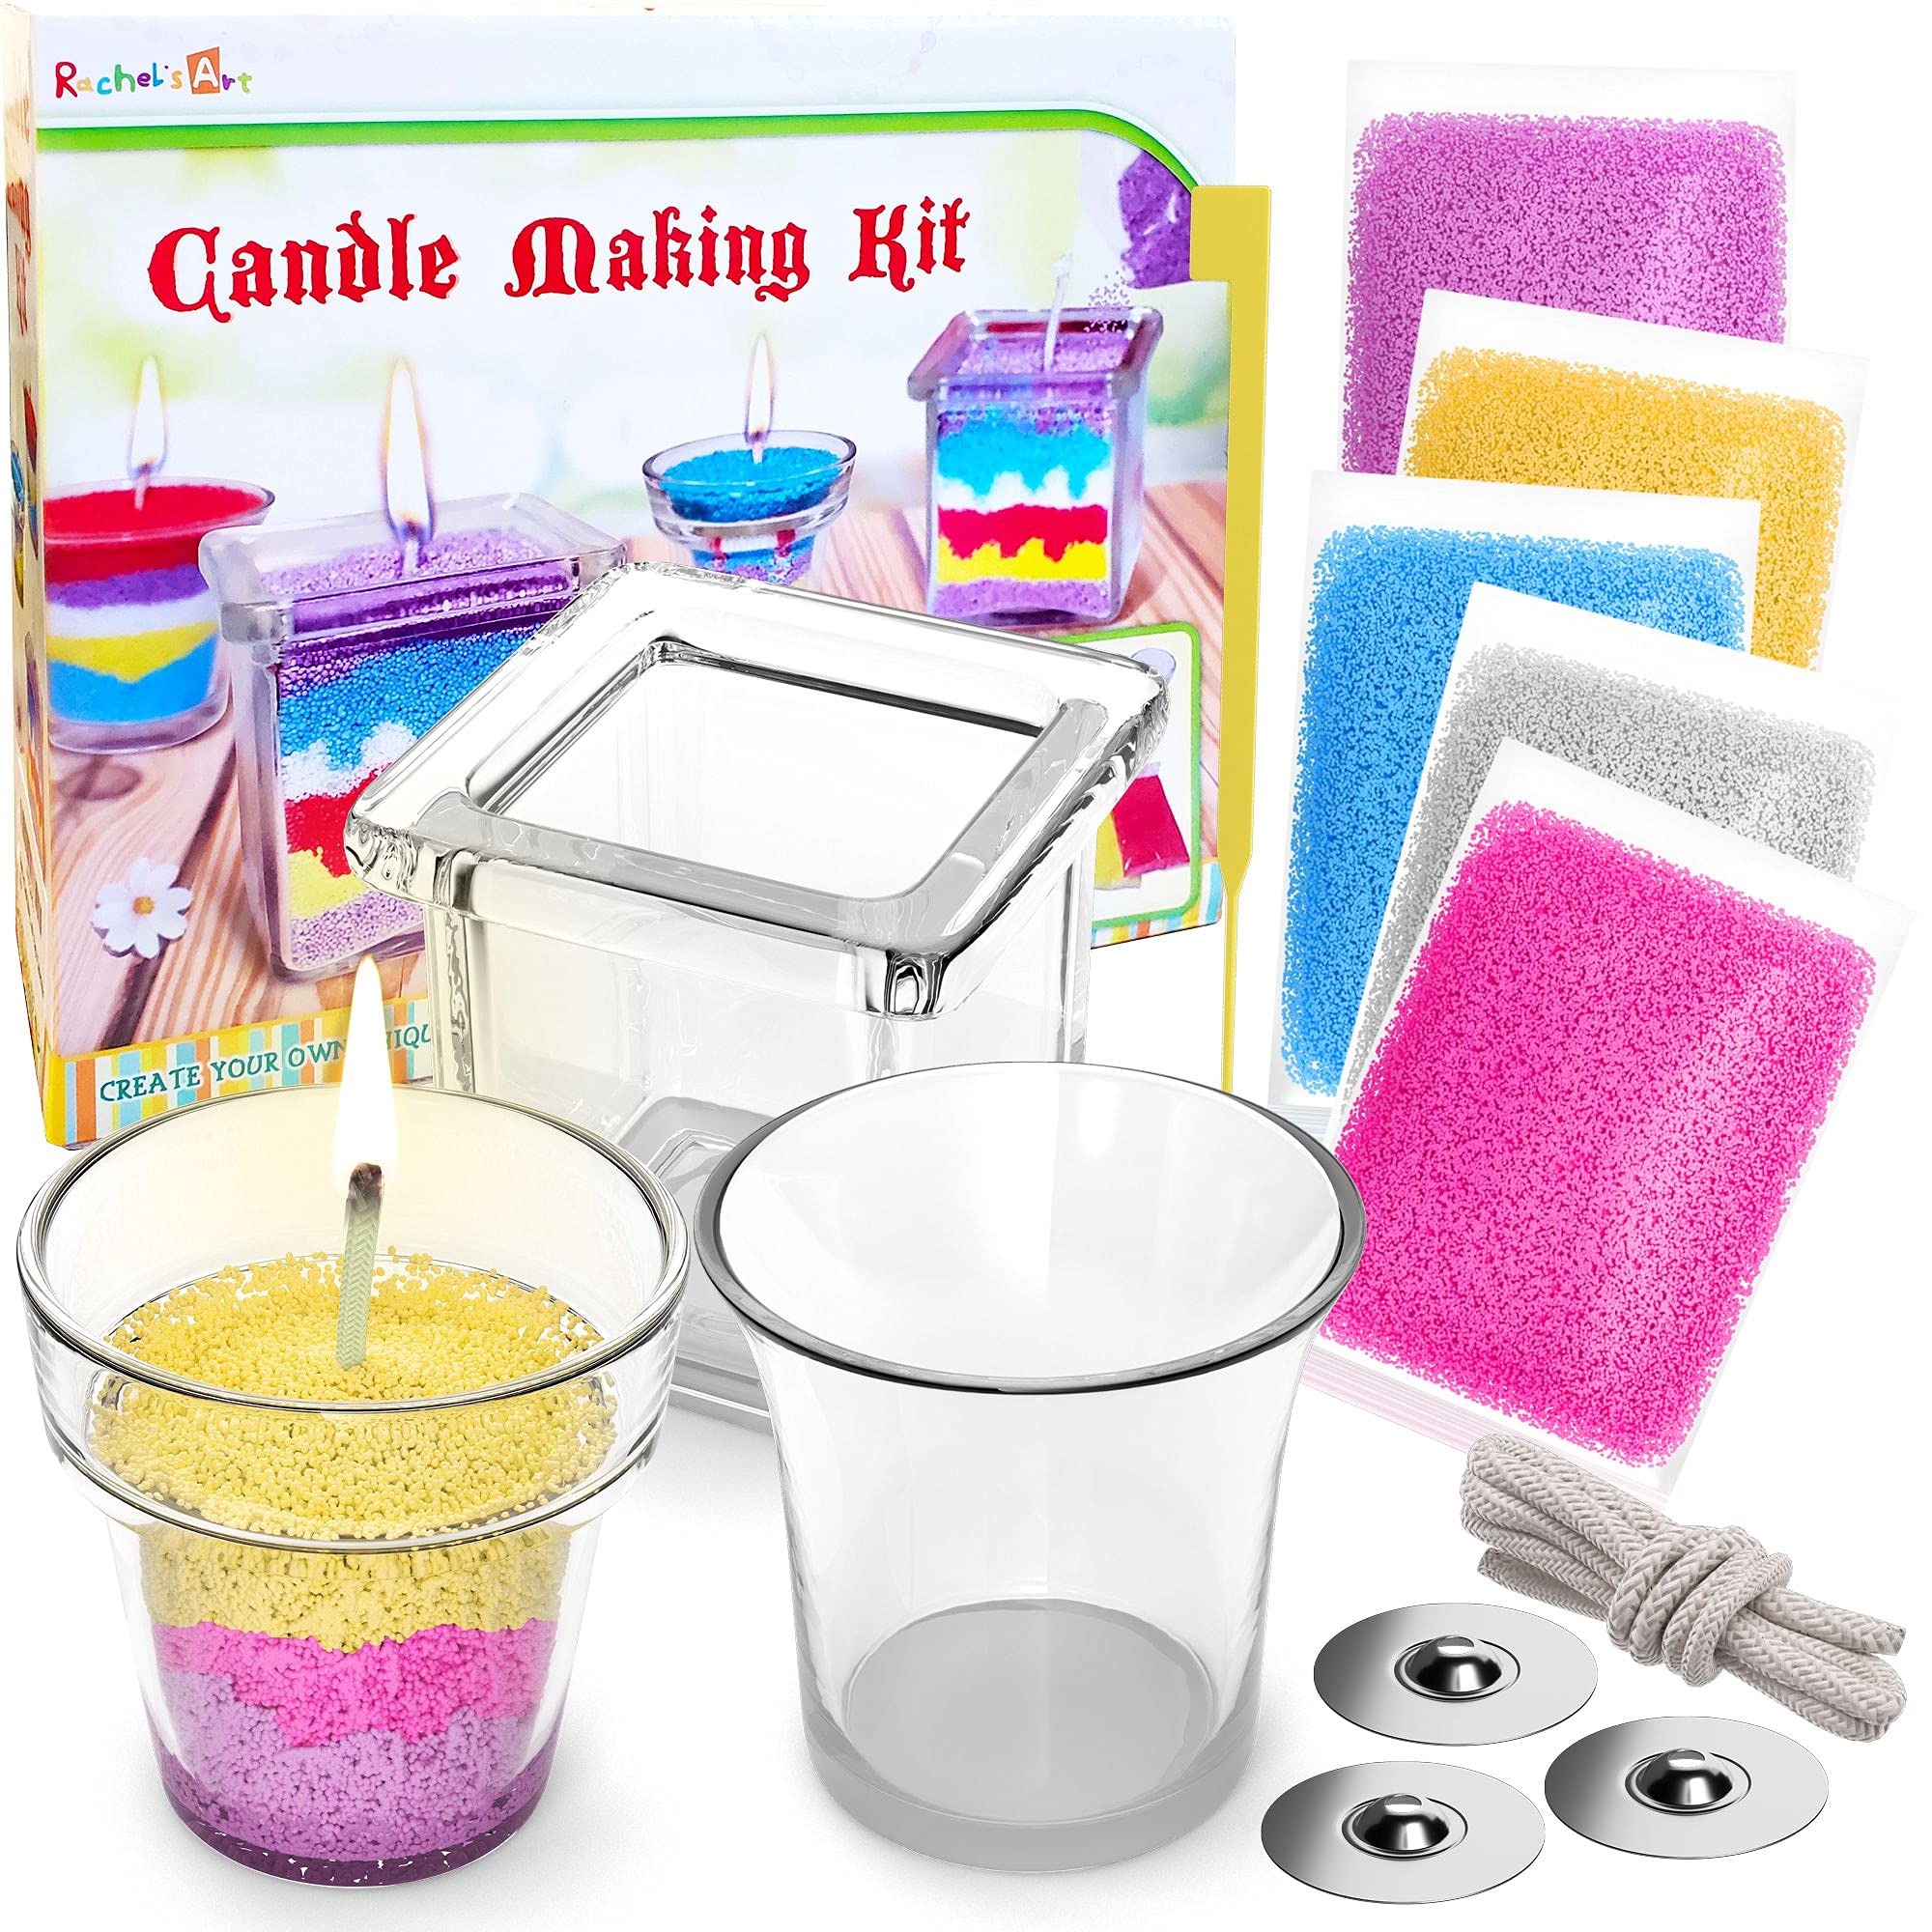 Rachel's Art - Candle Making Kit for Kids - DIY Kids Candle Making Kit - Design and Make Your Own Candles - Craft Supplies & Materials - 3 Glass Candle Containers, 3 Wicks, 5 Bags of Colored Wax  - Like New